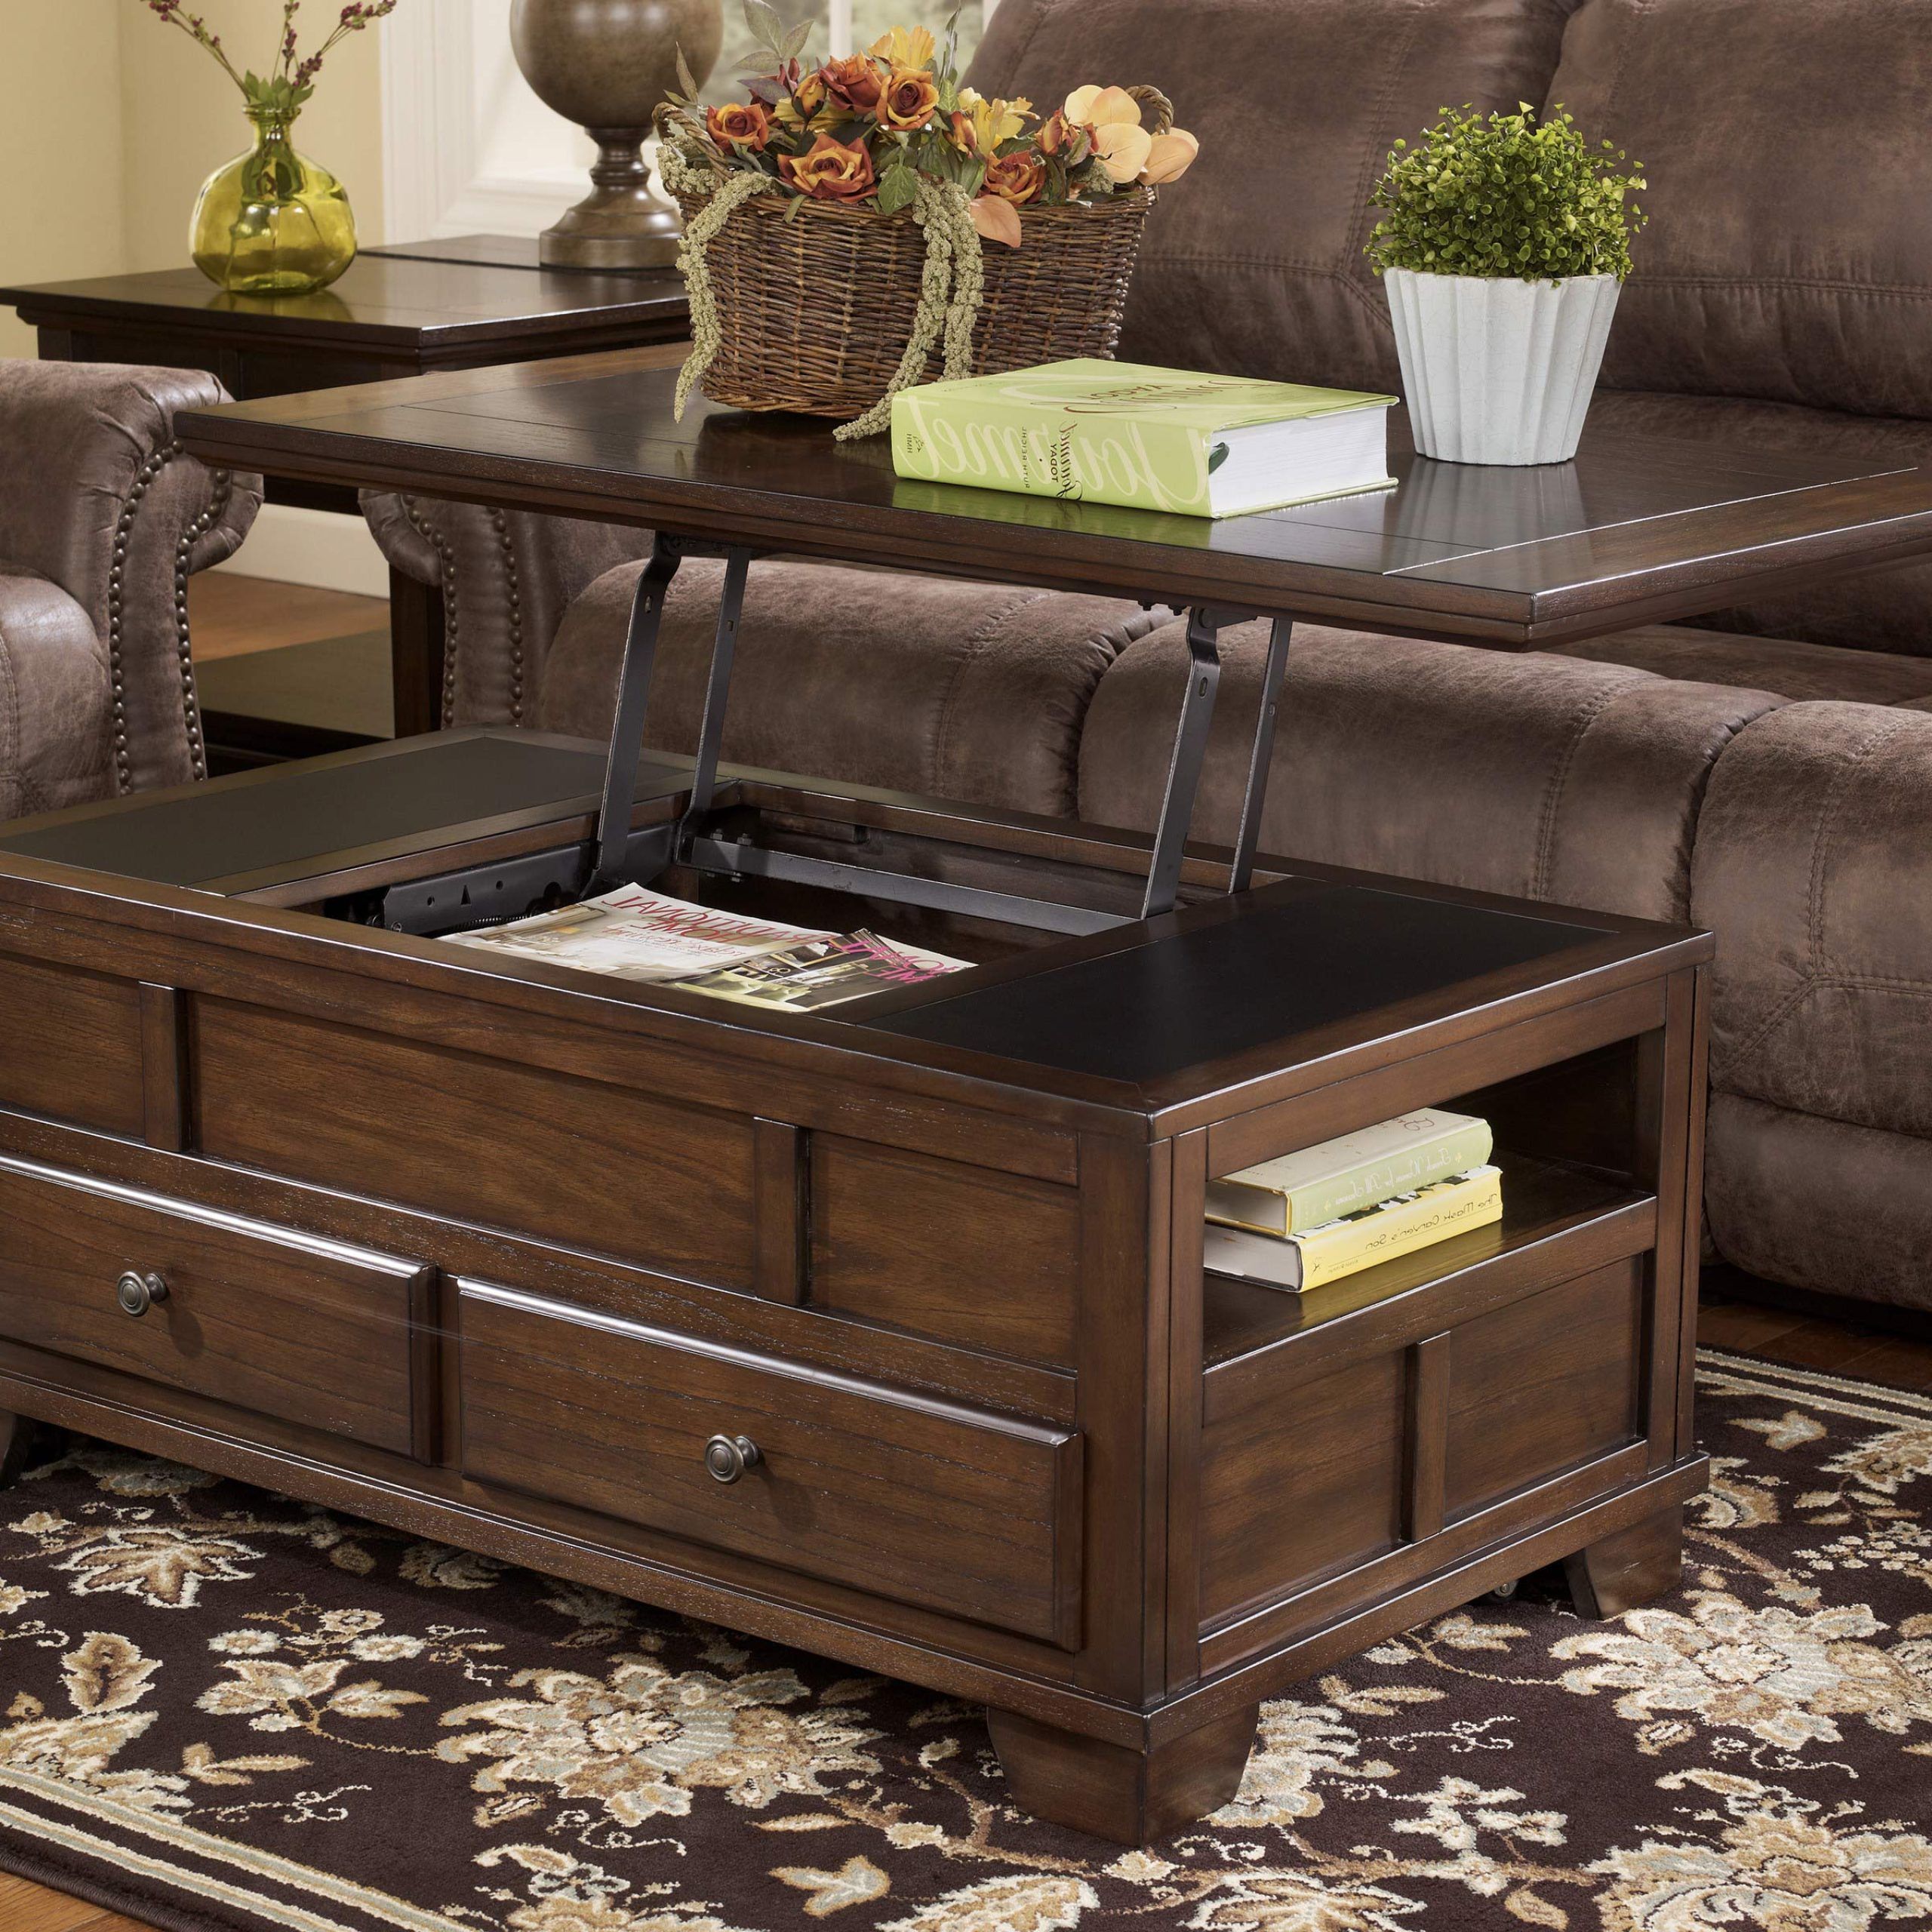 Lift Top Coffee Tables With Storage Regarding Lift Top Coffee Tables With Shelves (View 3 of 20)